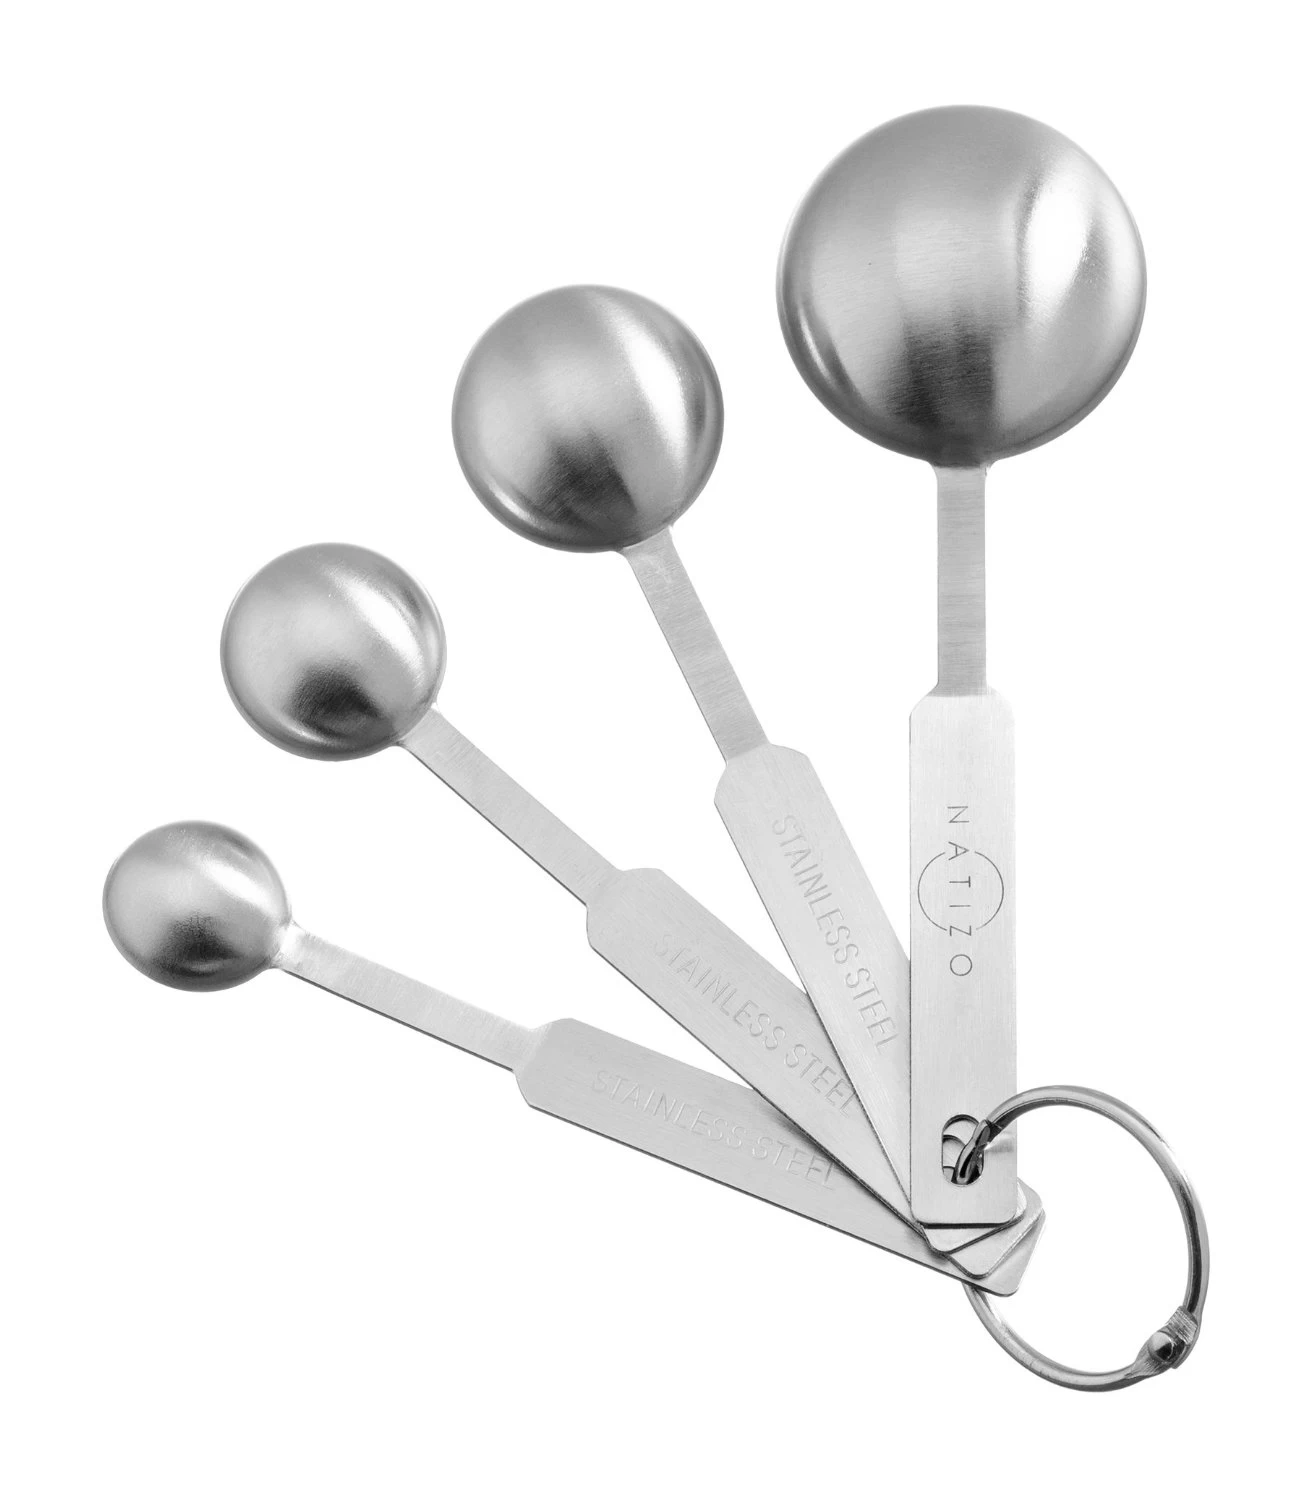 oem Stainless Steel Mearsuring Spoon, Stainless Steel Mearsuring Spoon china